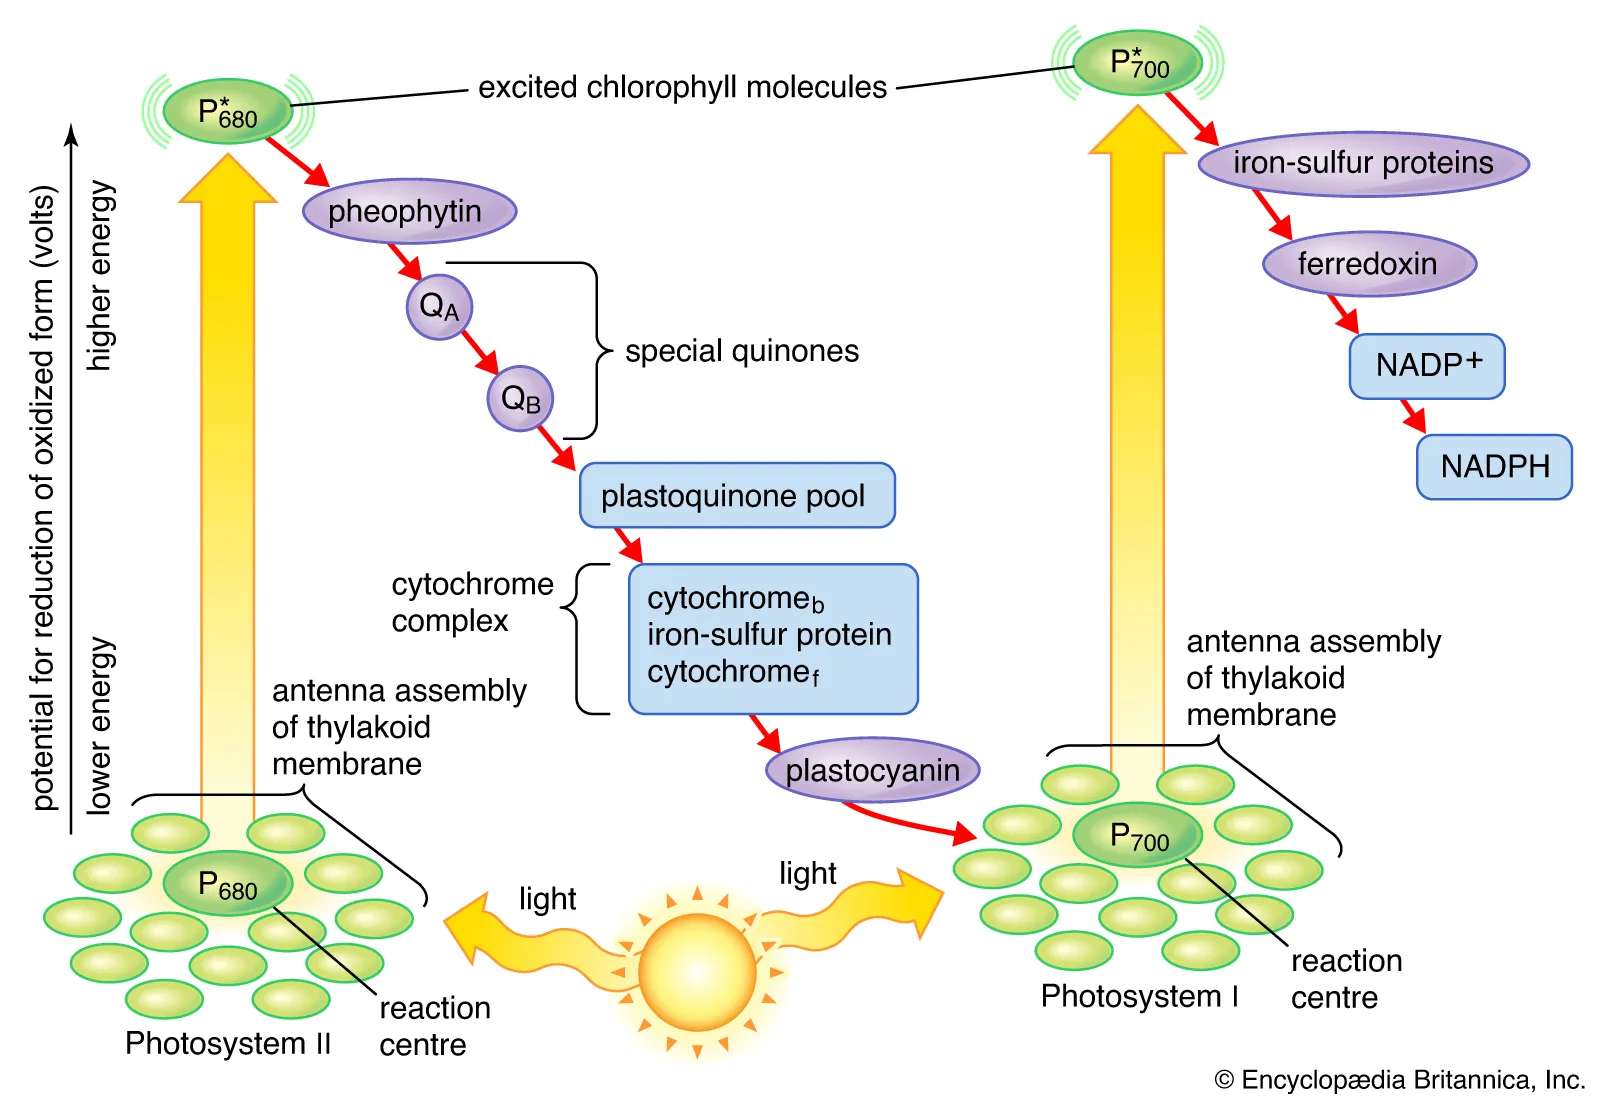 Difference between Photosystem 1 (PS1) and Photosystem 2 (PS2)